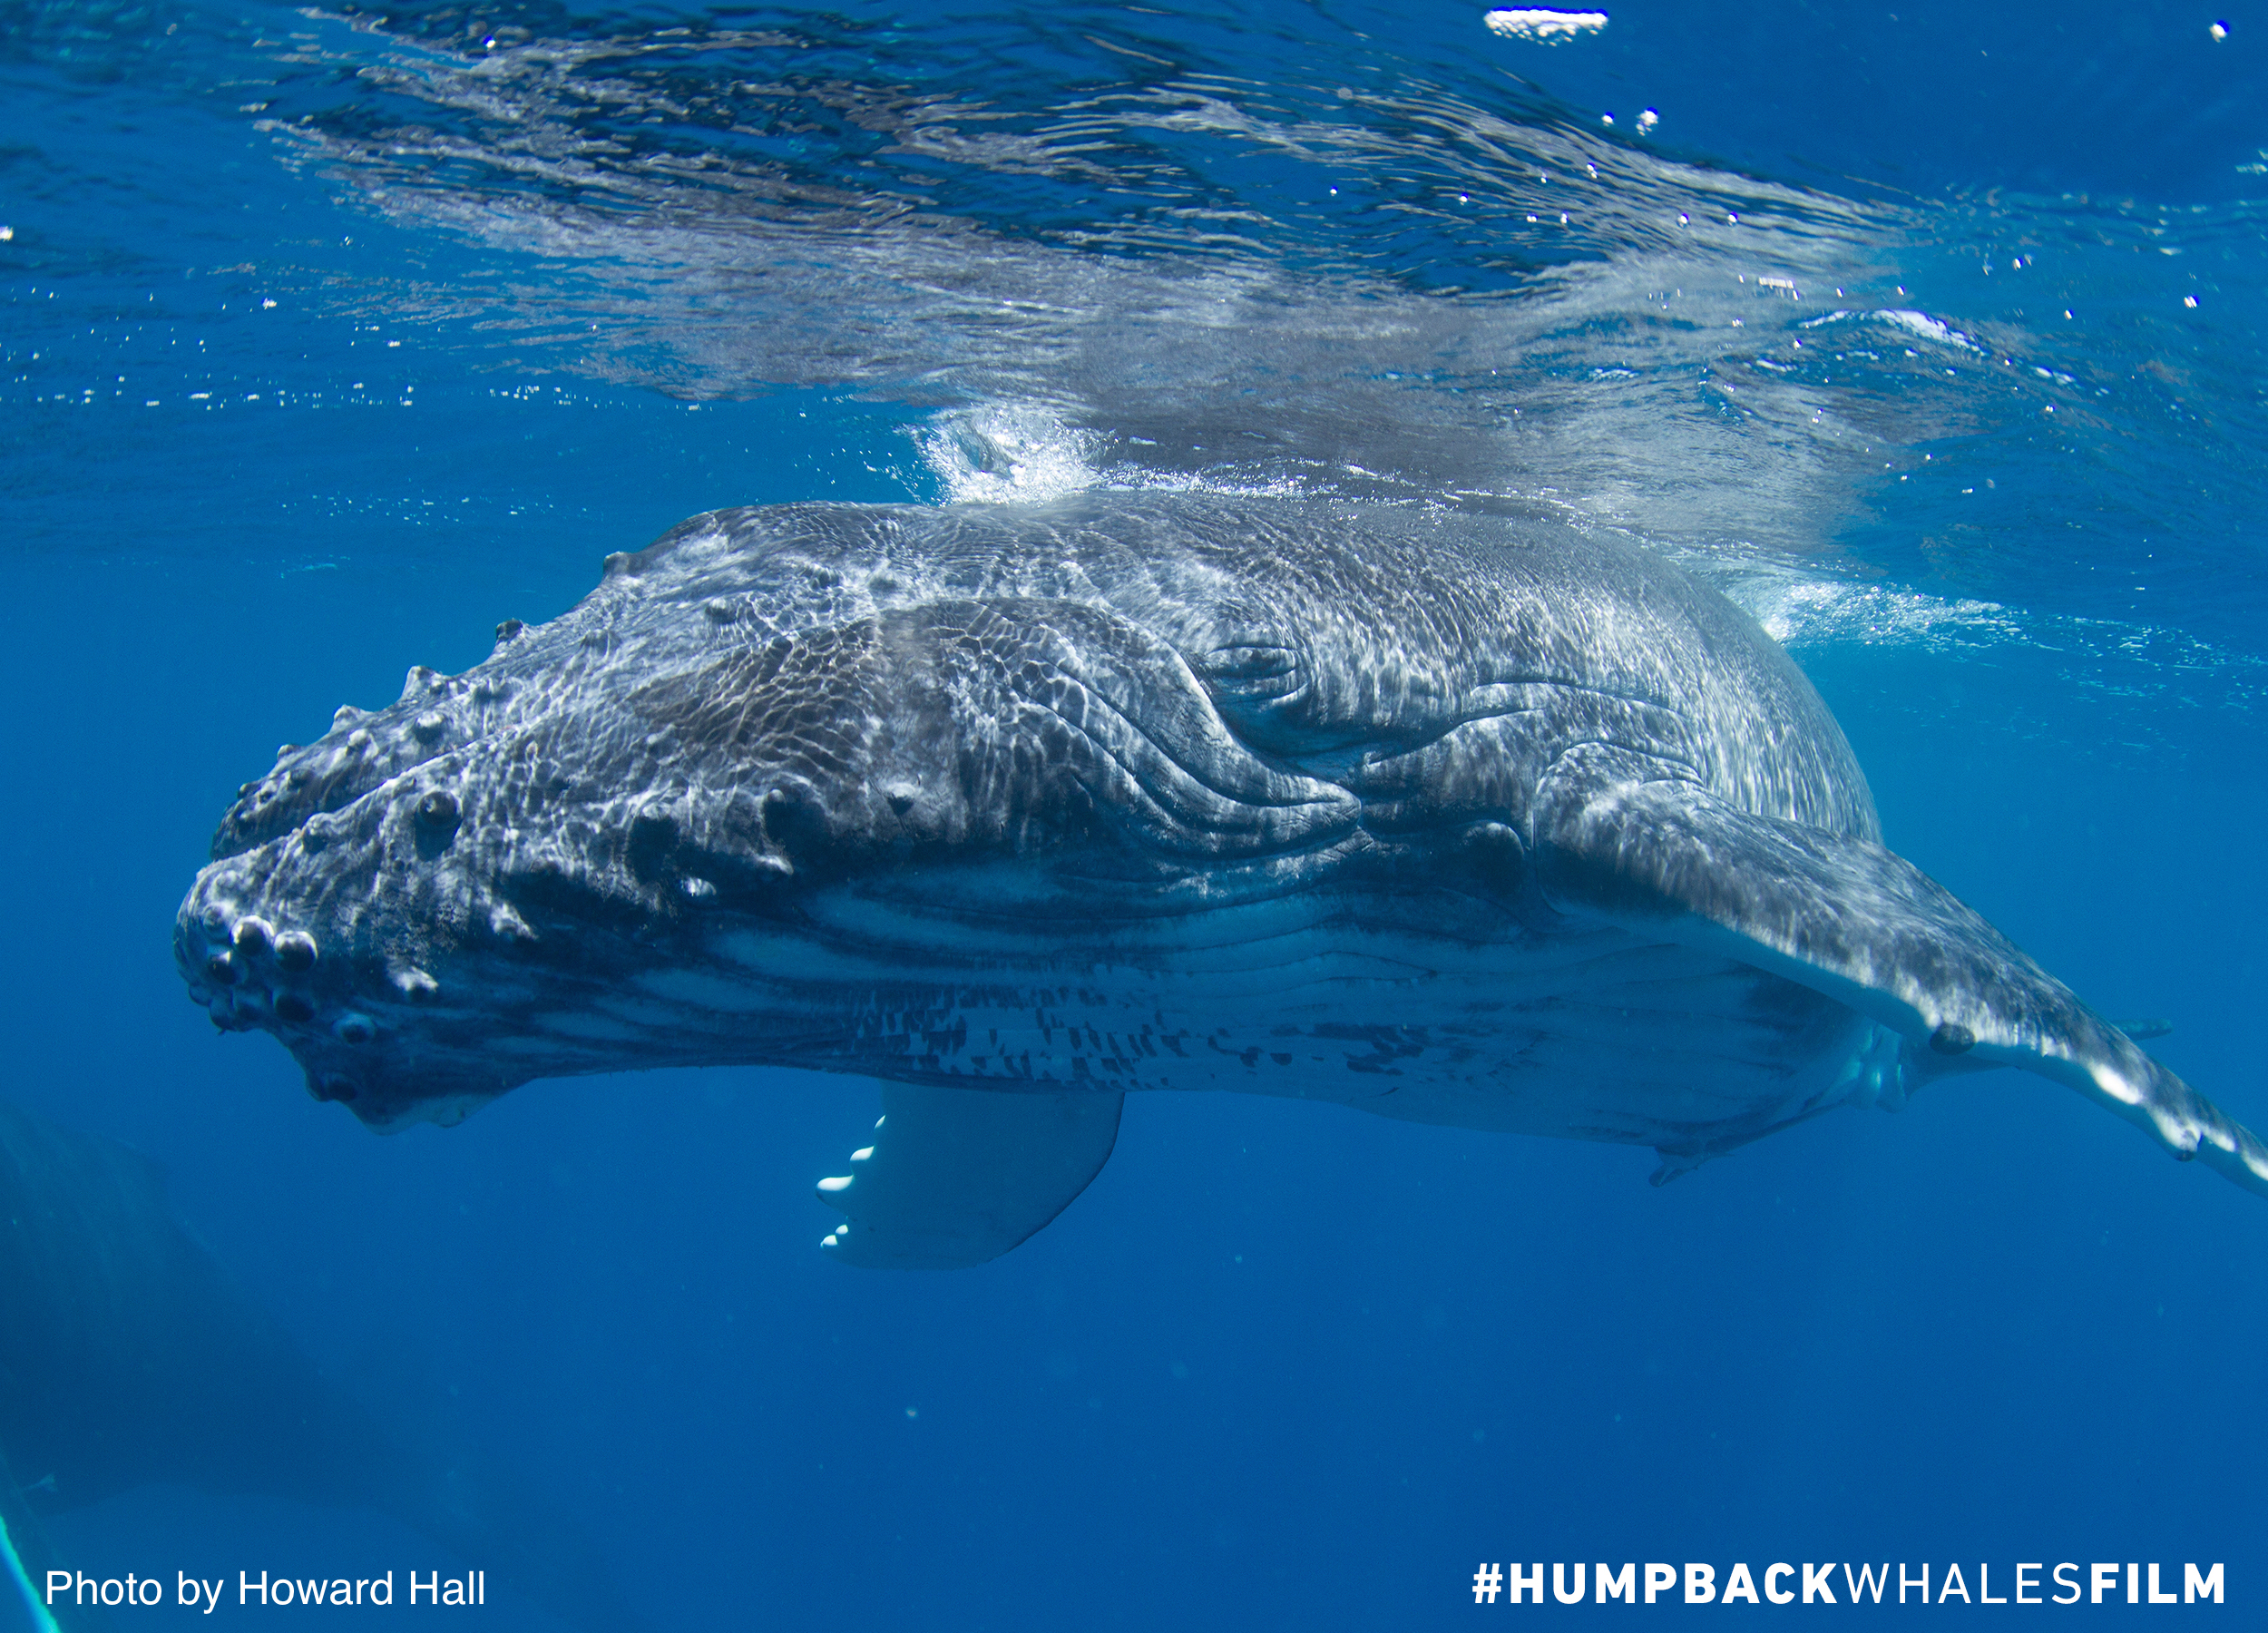 Do humpback whales have teeth?